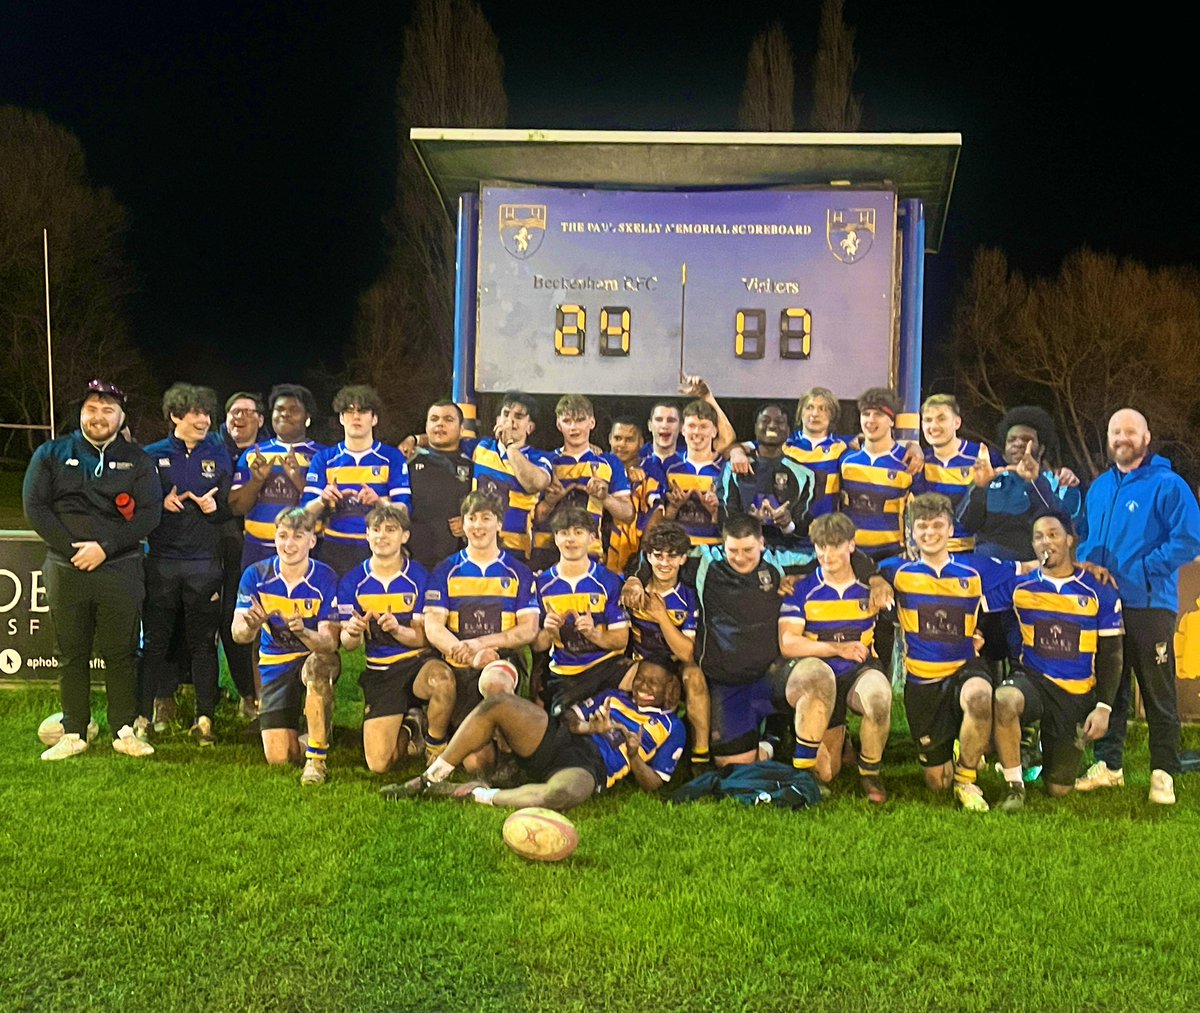 FNL Our academy took the WIN last night in a friendly round robin with @BeccehamianRFC 24-17 Thanks for travelling over @BeccehamianRFC and for a great game, we’ll see you at Sparrows Den in May! #blueandgold 🔵🟡